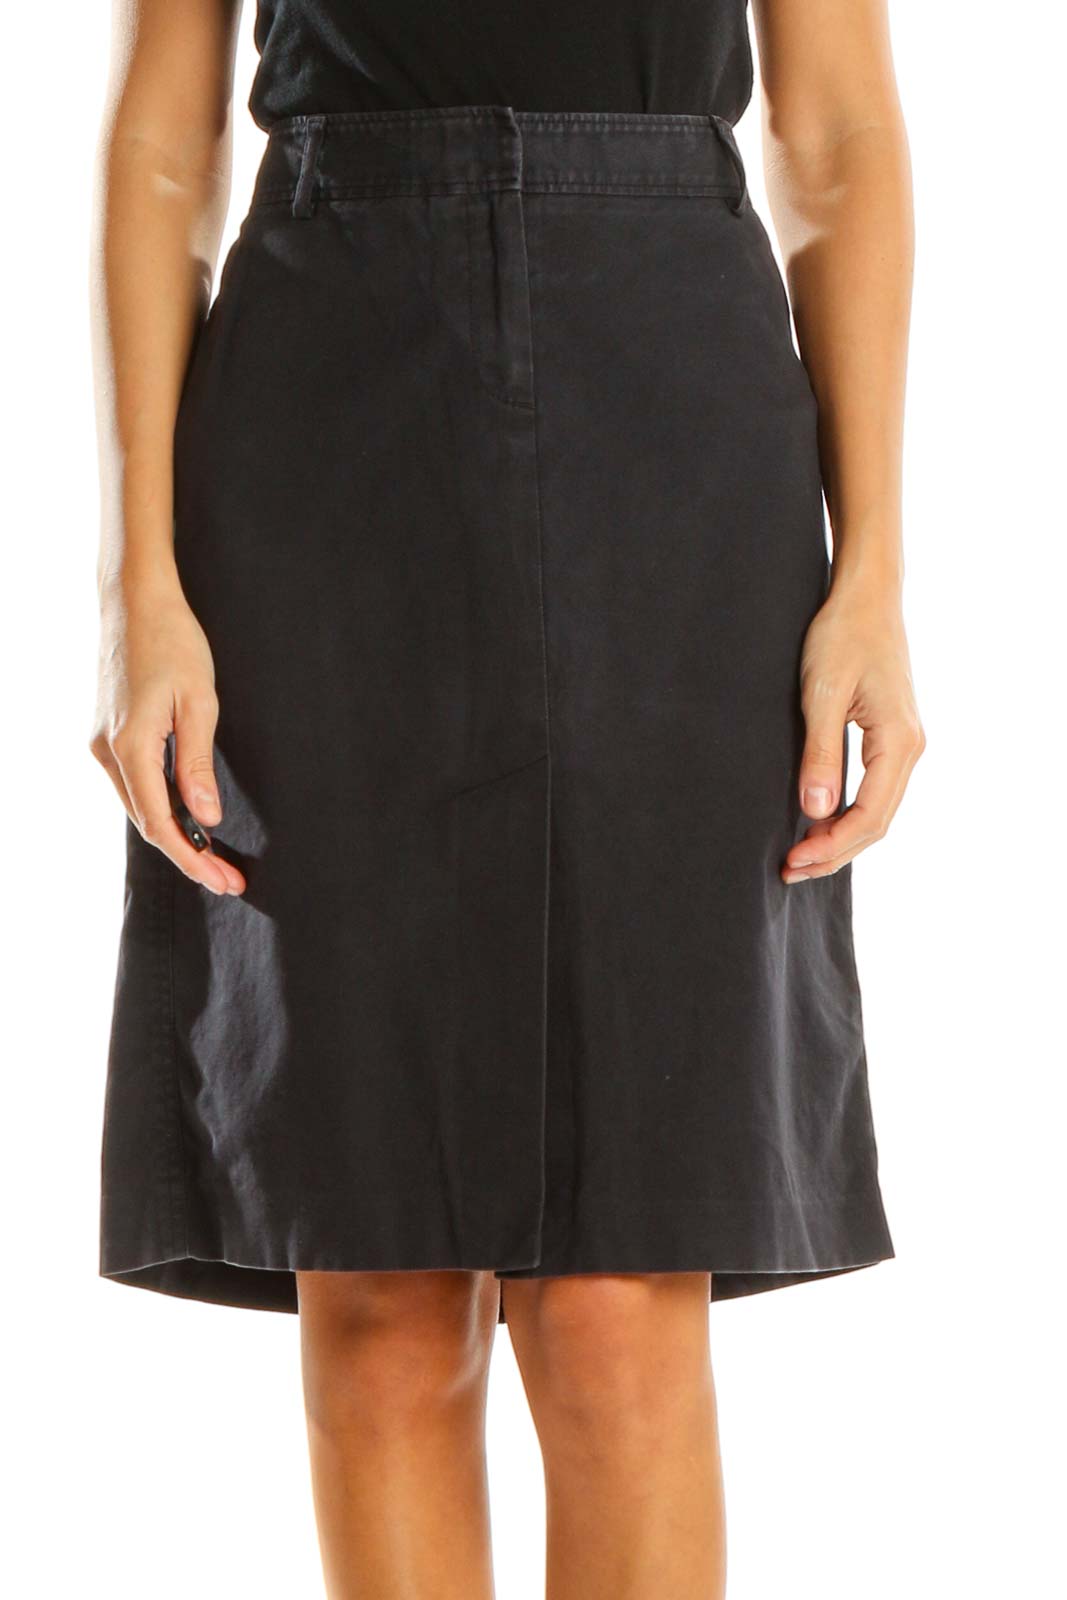 Black Solid Casual A-Line Skirt Front